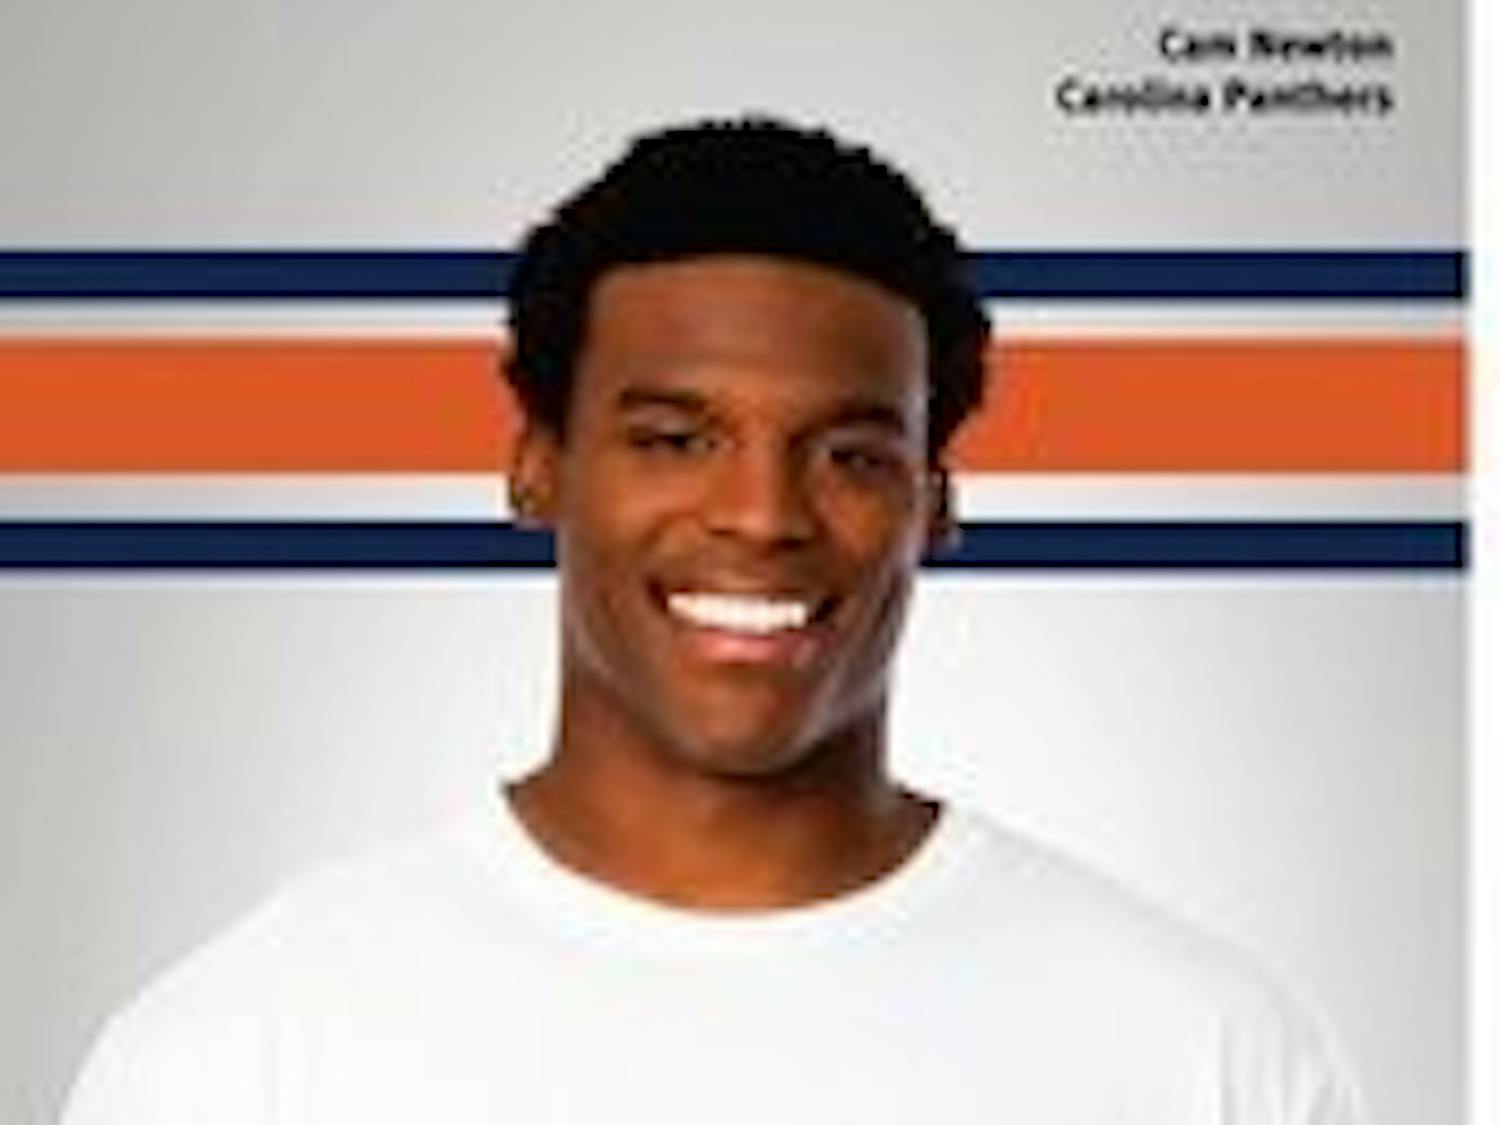 Participating in Team NFL for the second straight year, Cam Newton is attempting to get 3,000 "readers, tutors, or mentors" to sign on to assist students and lower the dropout rate in schools. (CONTRIBUTED BY MICHELE DANNO)